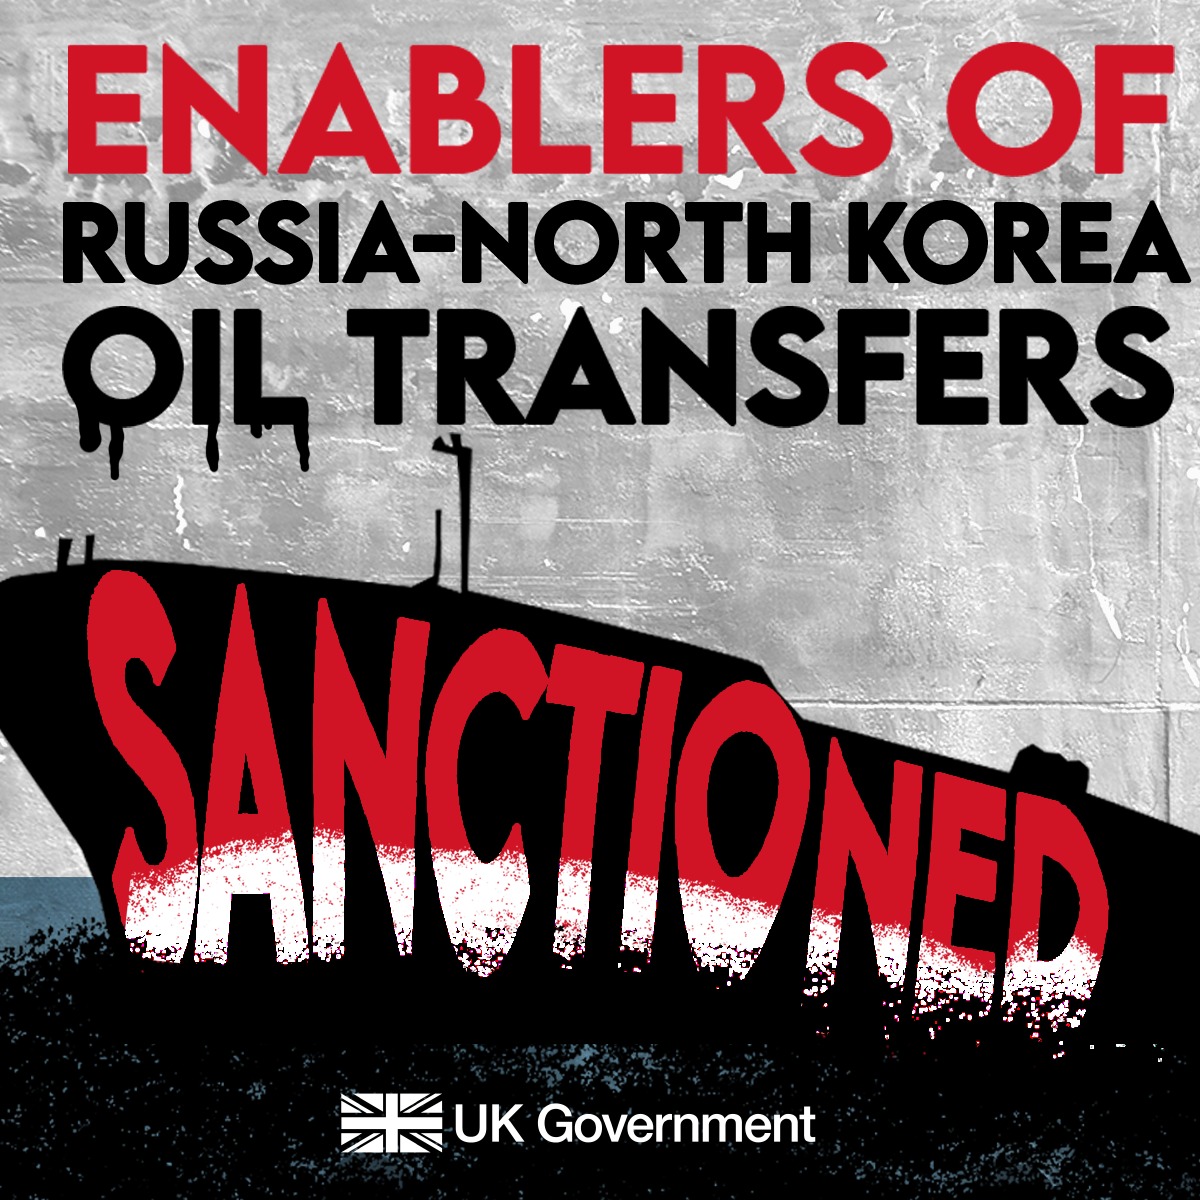 🚨 SANCTIONED: companies enabling illicit 'arms-for-oil' transfers between Russia and North Korea. The UK is working with partners to protect the global non-proliferation regime and international peace and security.